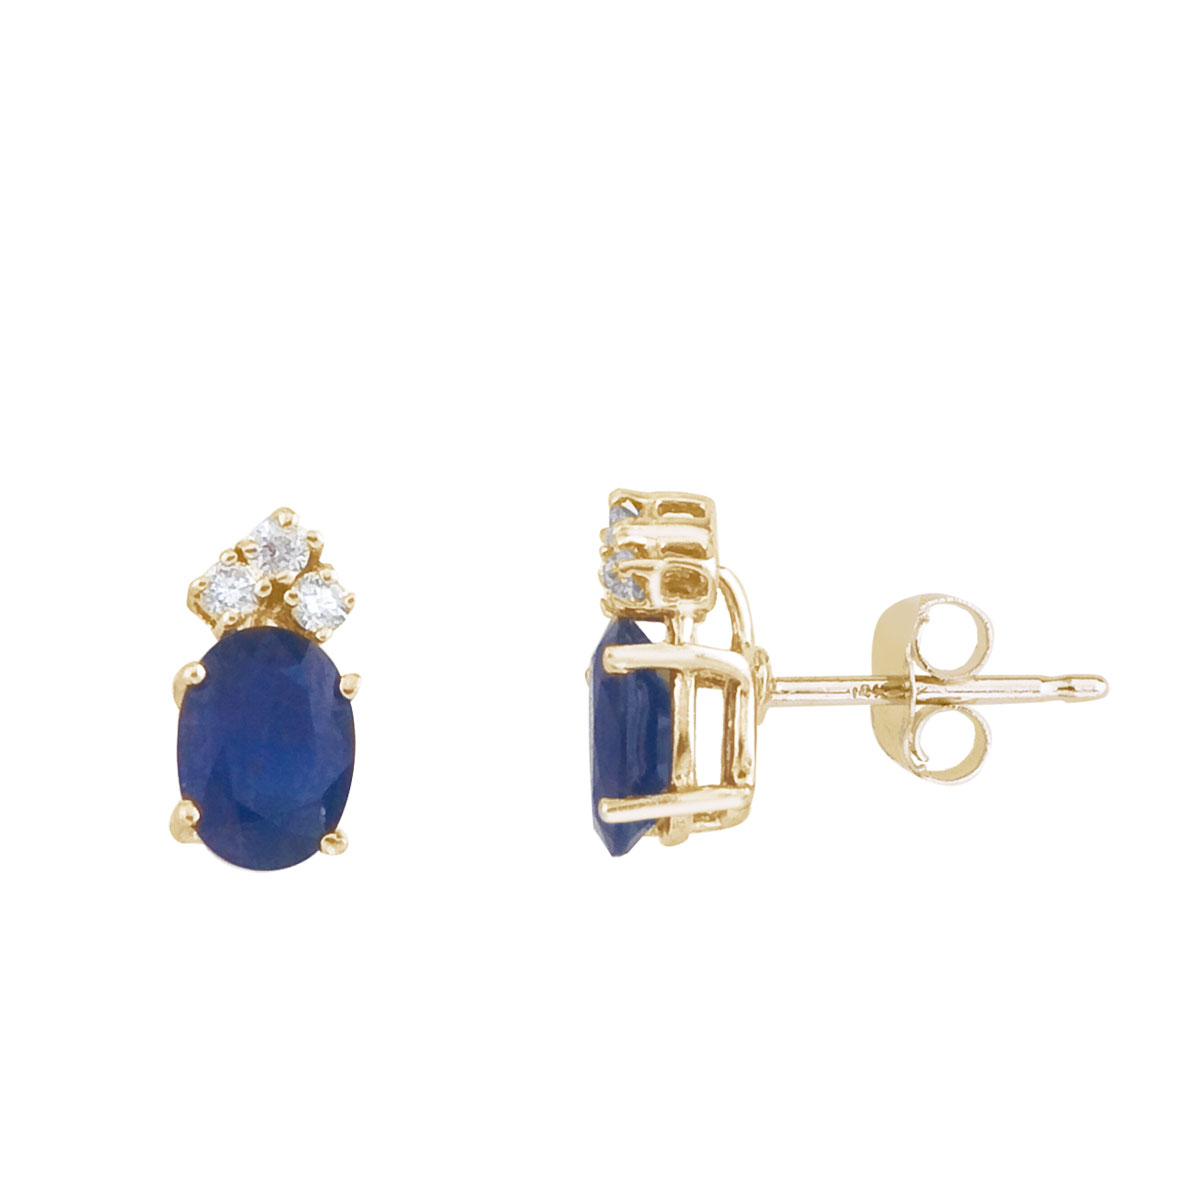 These 7x5 mm oval shaped sapphire earrings are set in beautiful 14k yellow gold and feature .12 t...